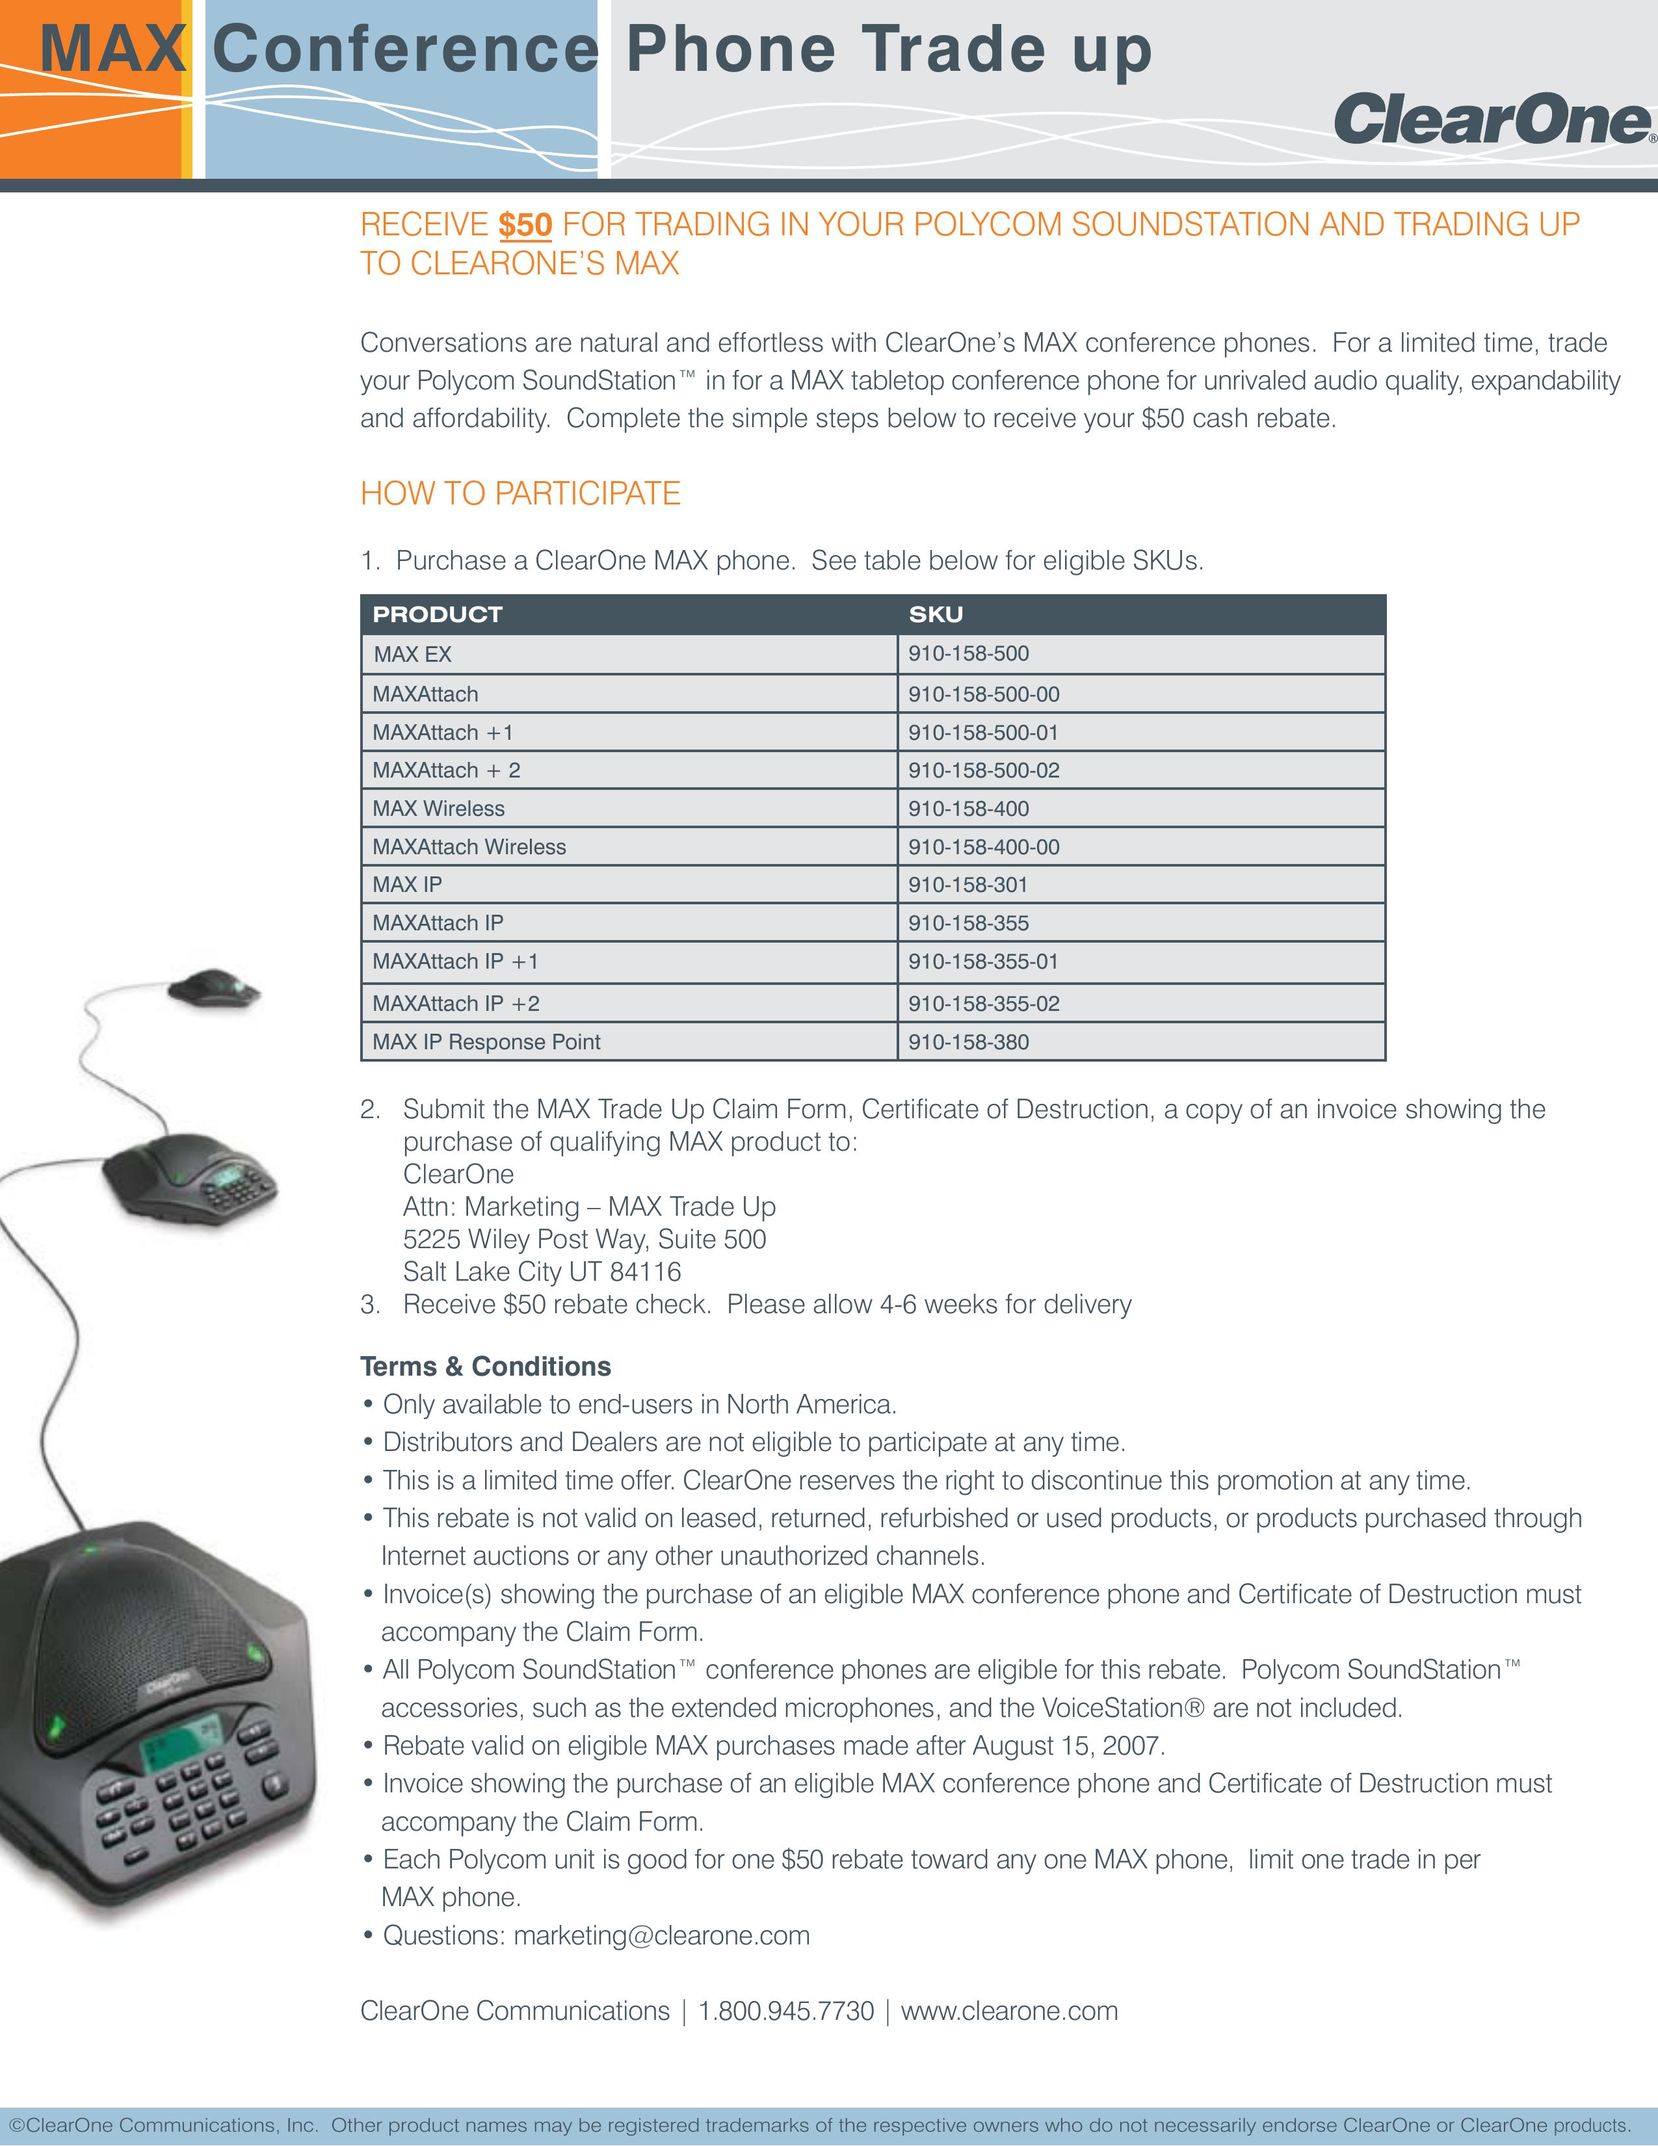 ClearOne comm MAXAttach IP +1 Conference Phone User Manual